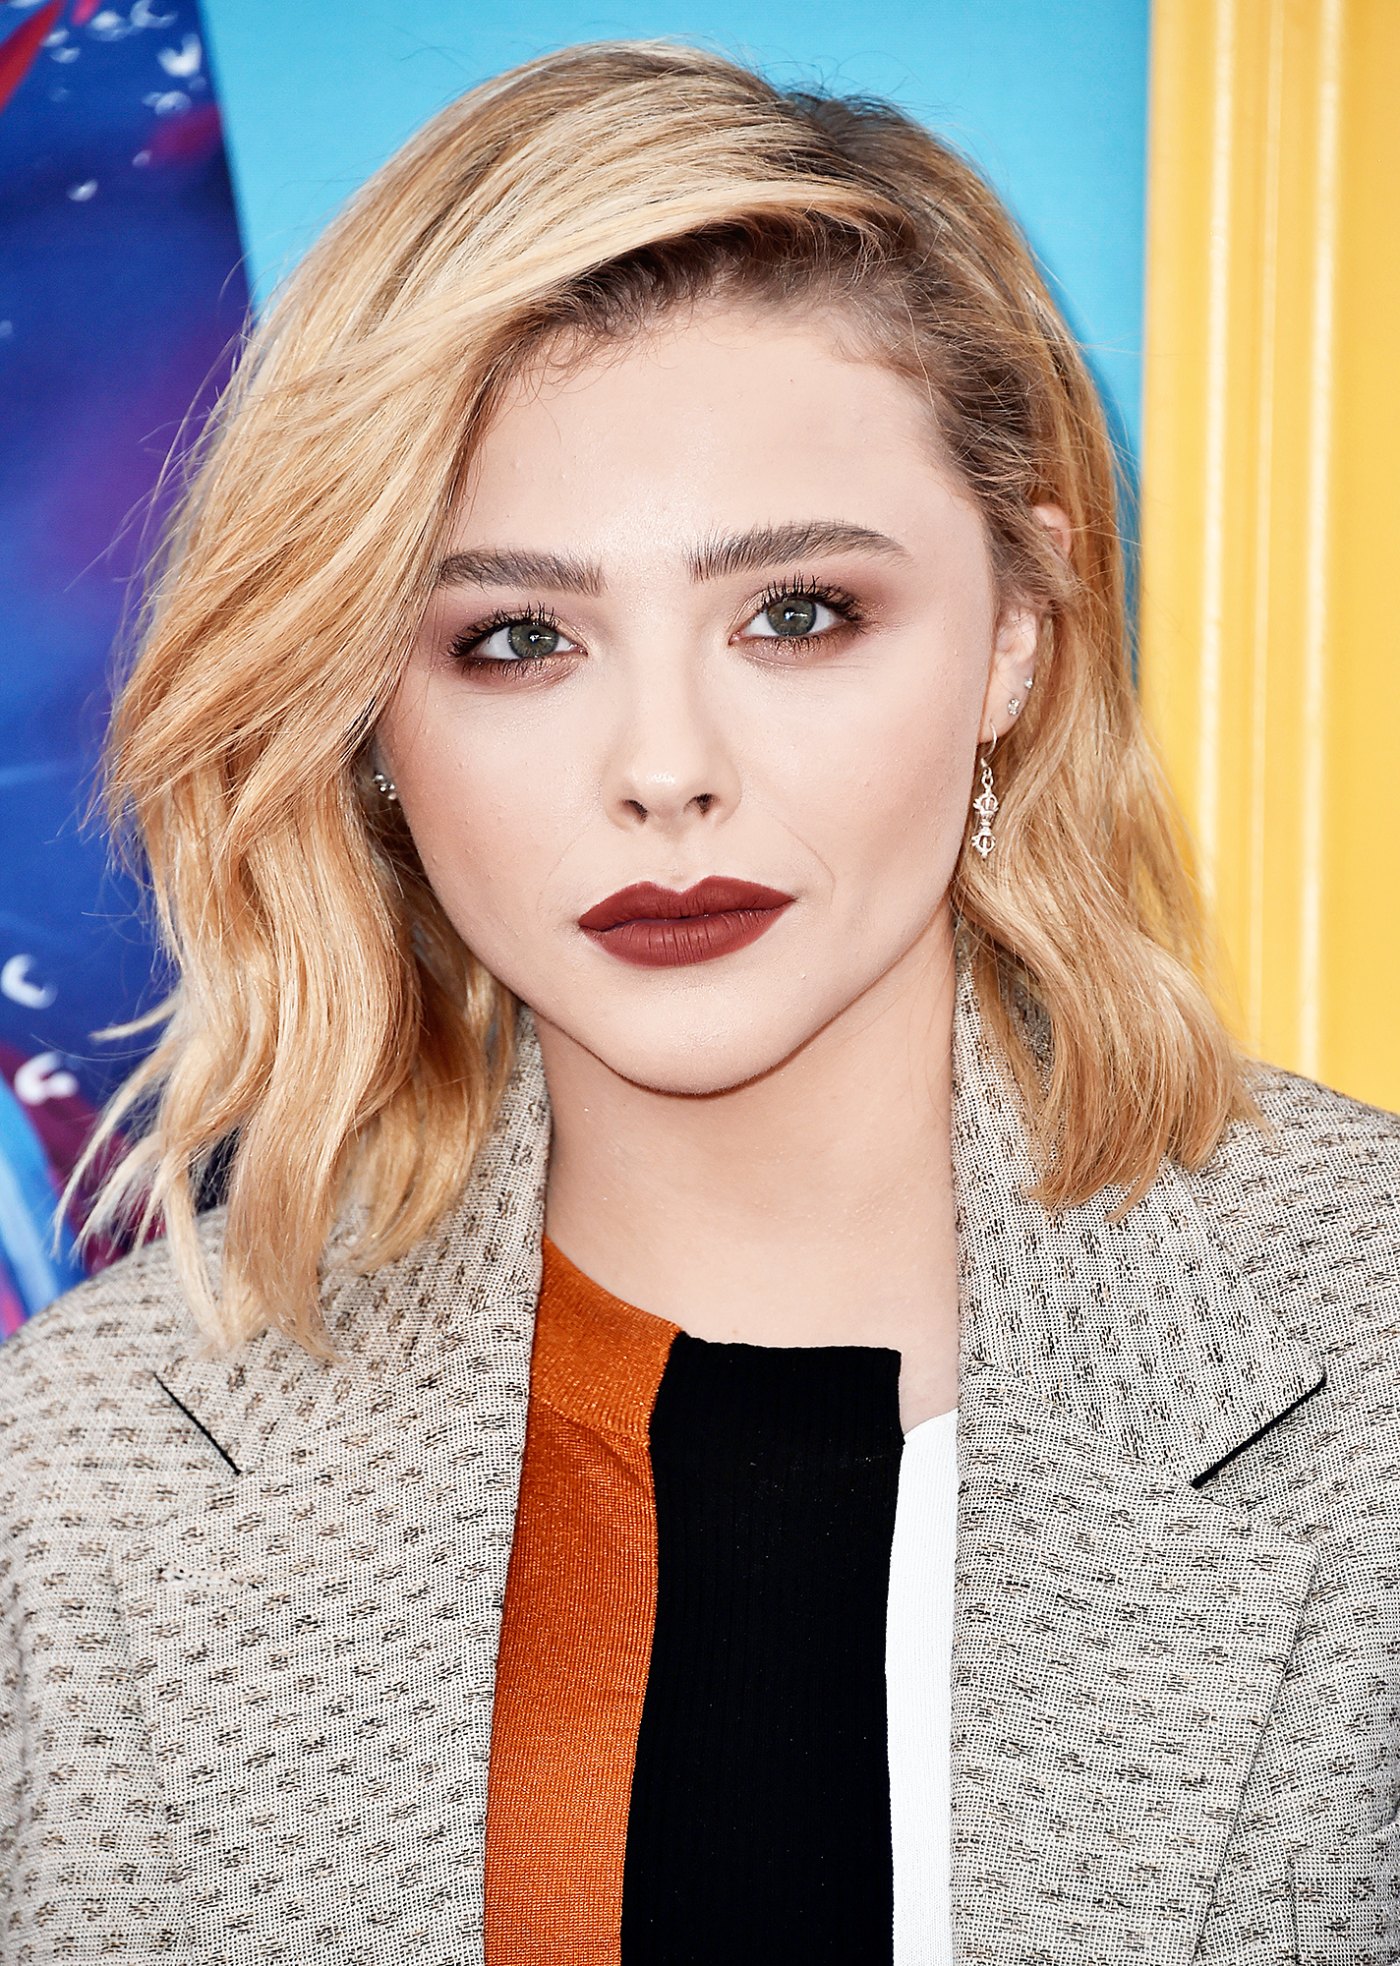 Chloe Grace Moretzs Rich Red Beauty Look Makeup Artist How To Us Weekly 